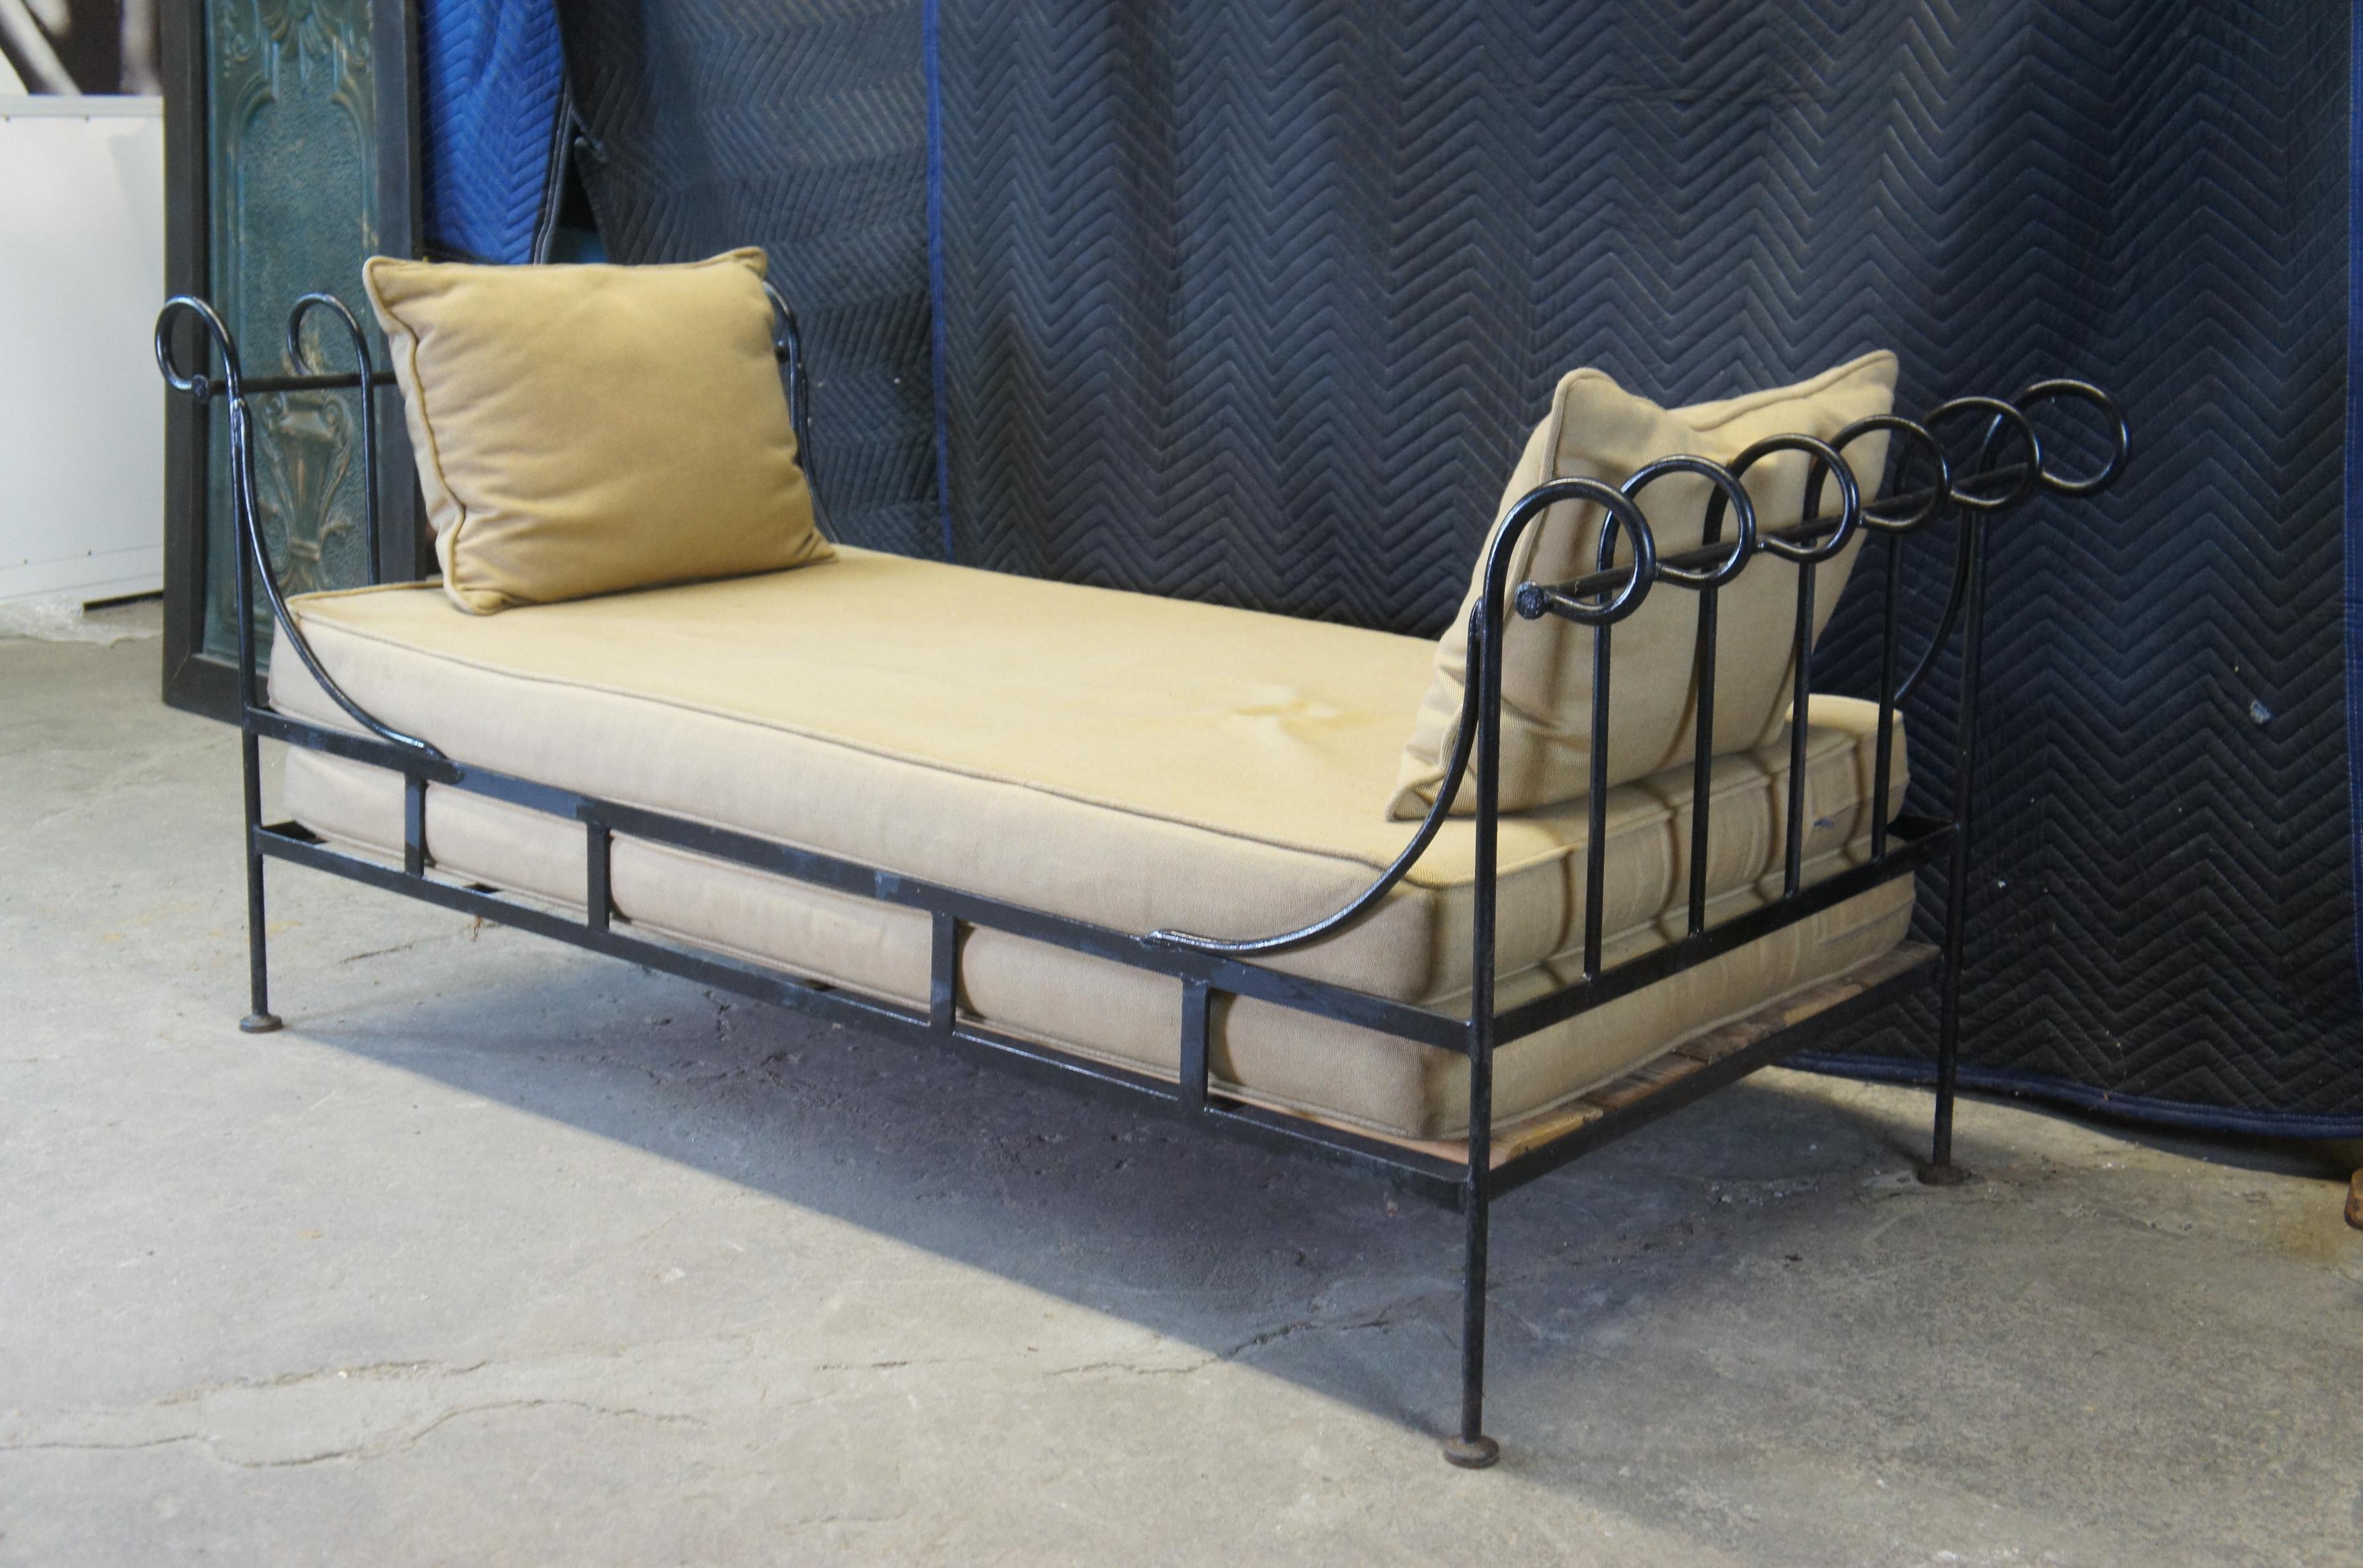 Upholstery Vintage Neoclassical Directoire Style Scrolled Iron Outdoor Daybed Sofa 72